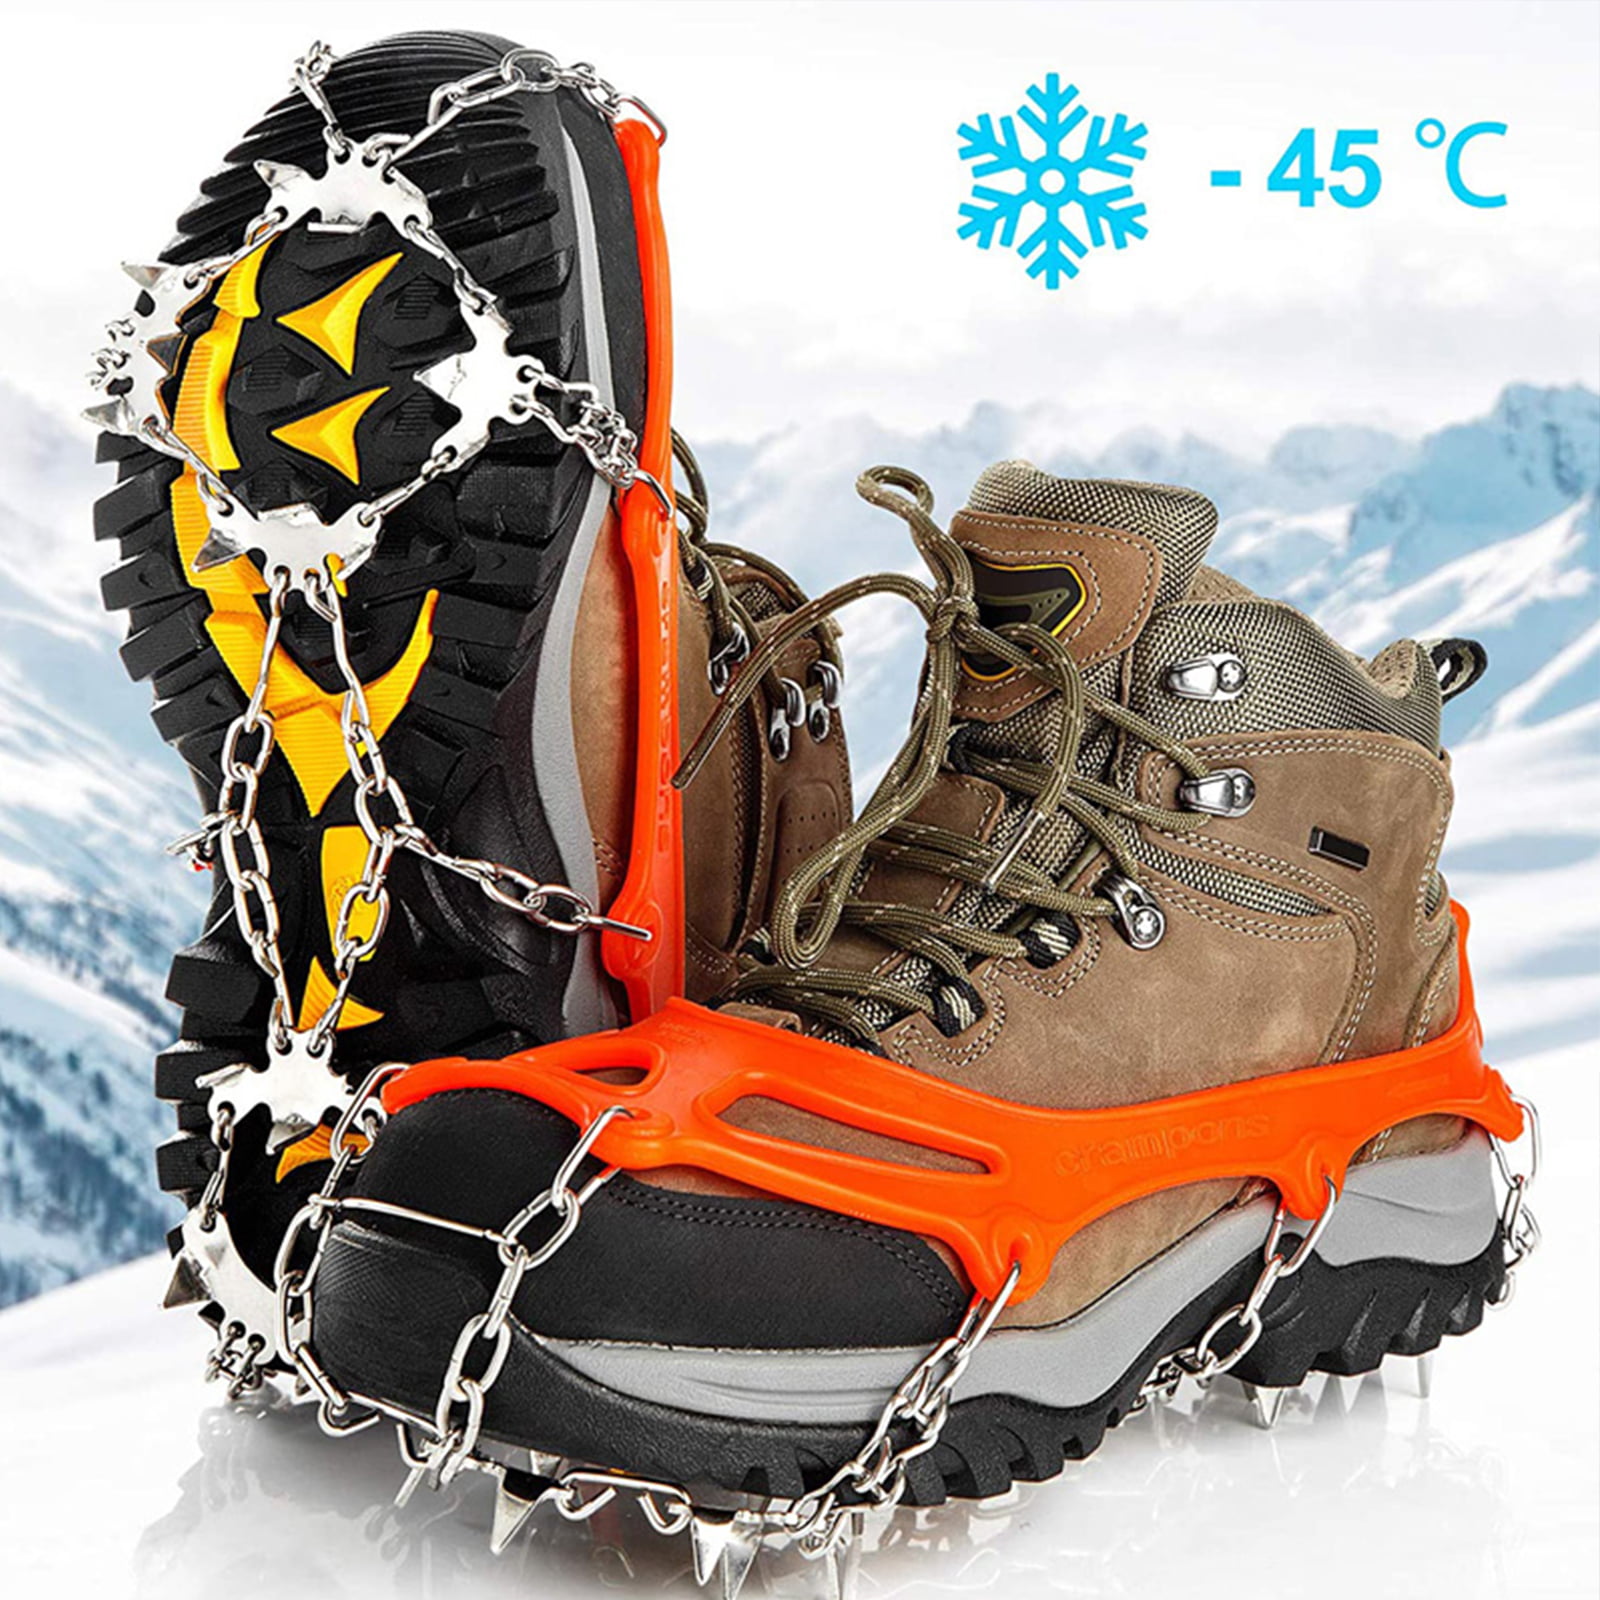 MIRACOL Crampons Ice Cleats Traction Snow Grips 19 Spikes Walk Traction with Anti-Slip Stainless Steel Spikes for Men Women Hiking Walking Jogging Mountaineering 